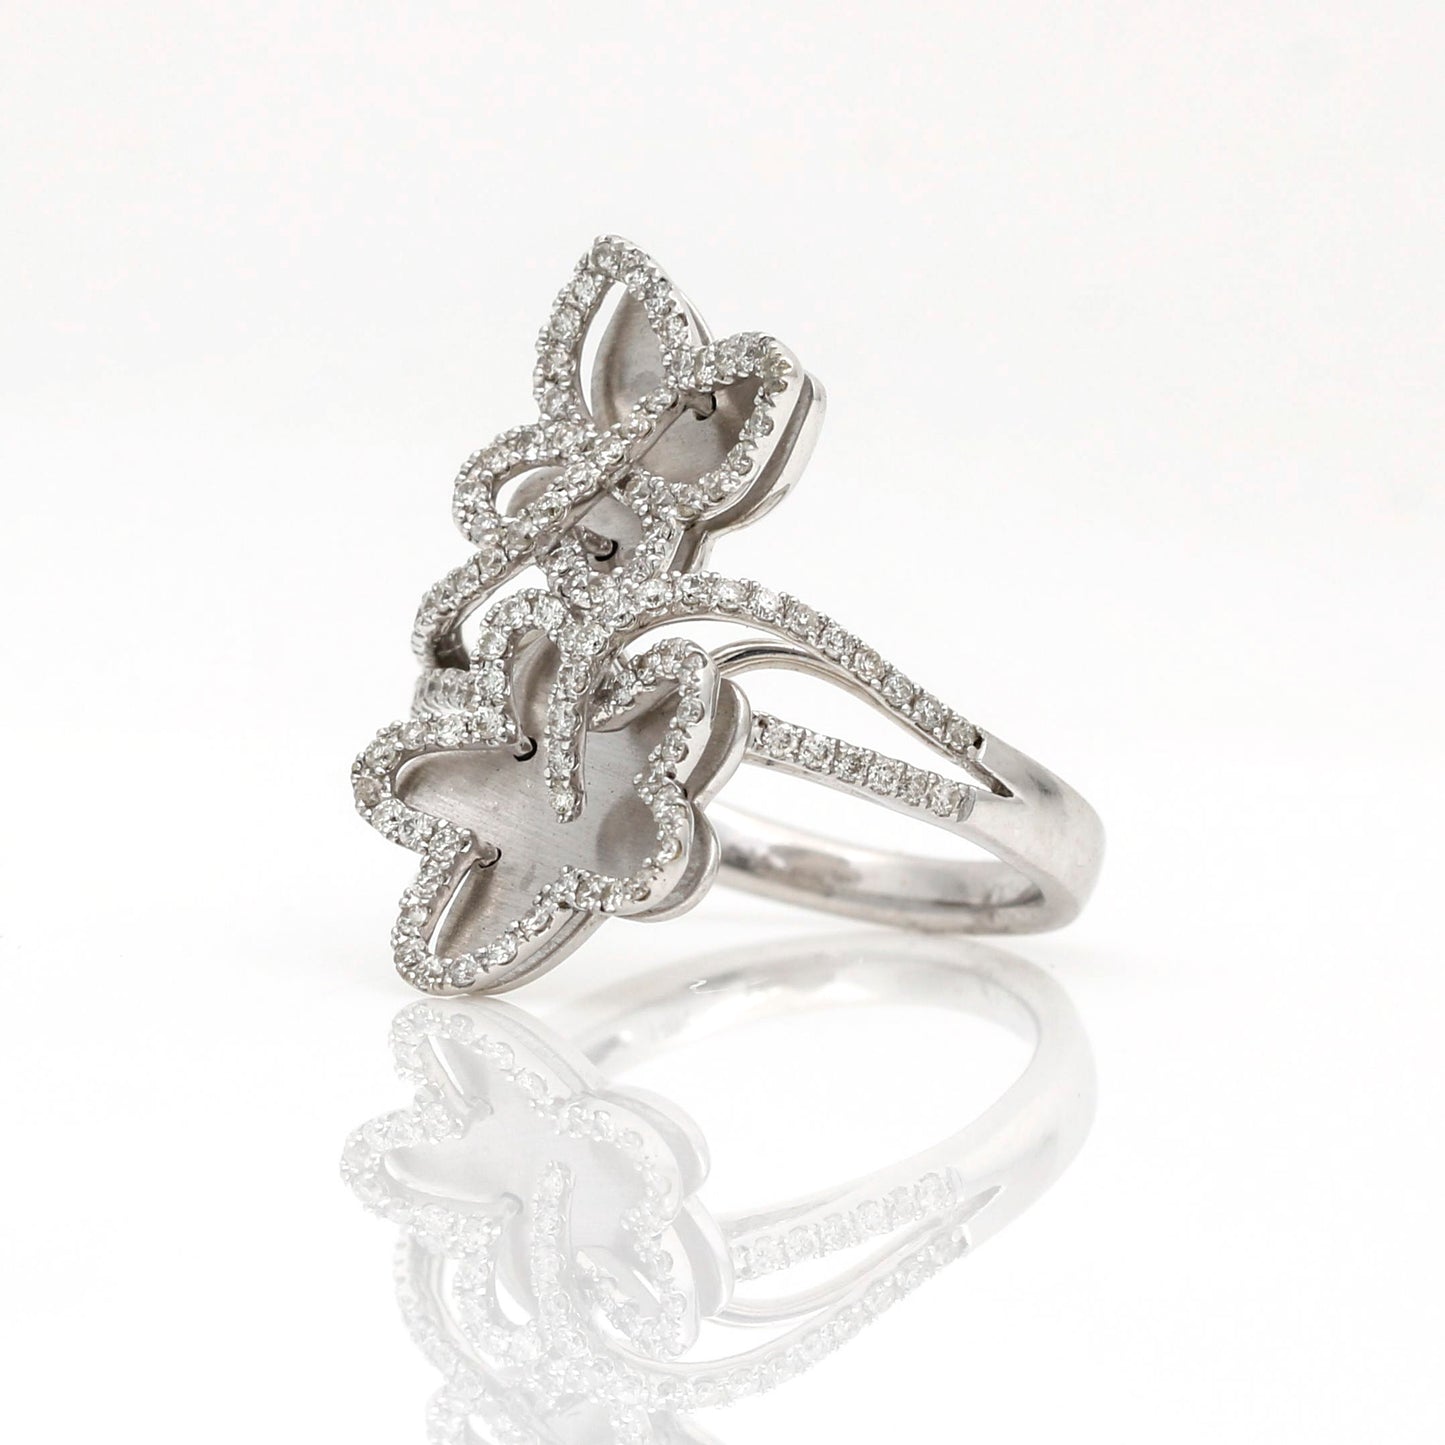 Enchanting Butterfly Flower Bypass Diamond Statement Ring in 14k White Gold